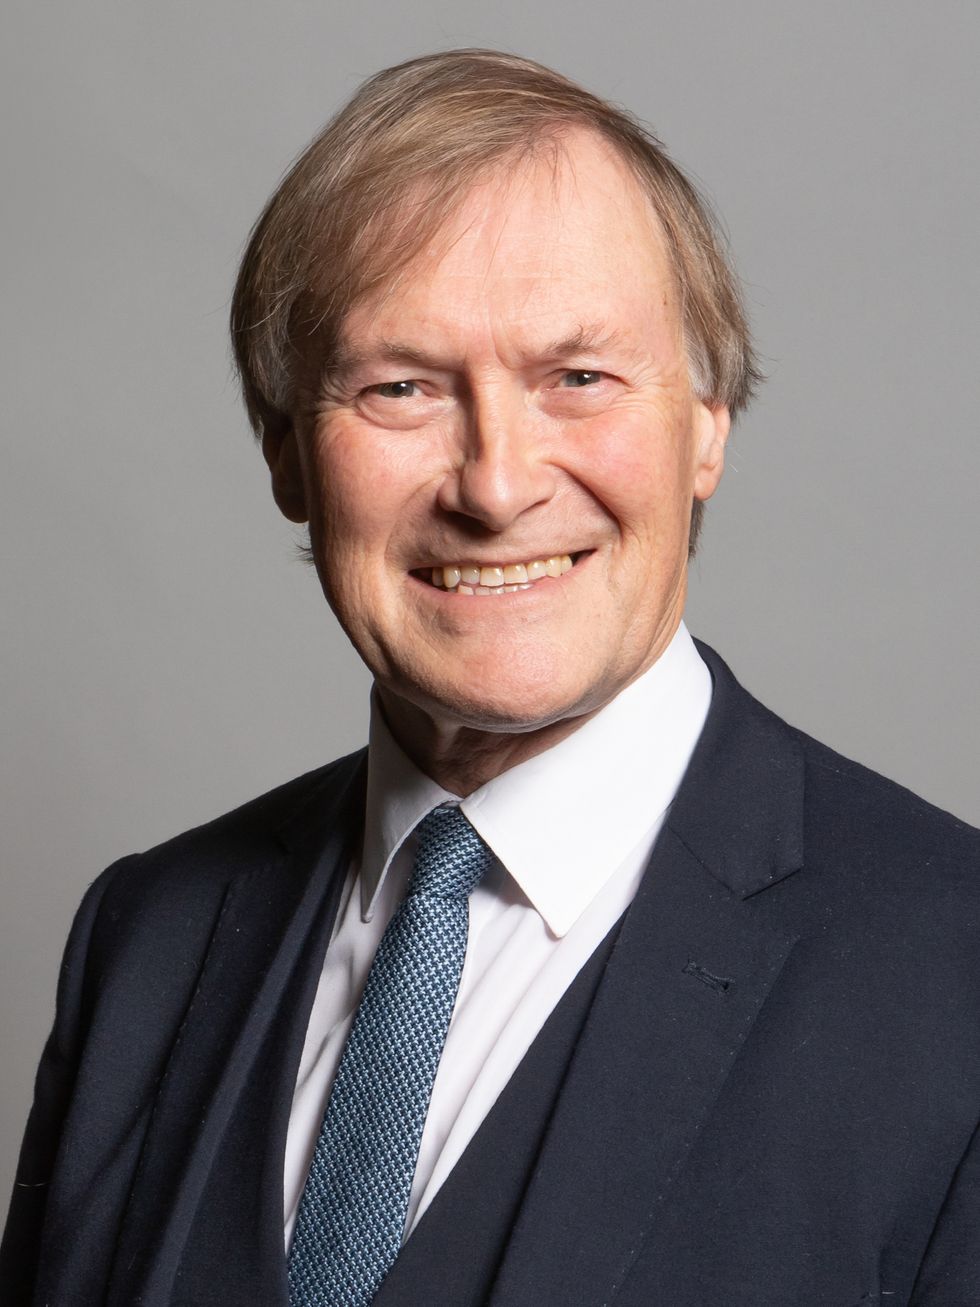 Undated handout file photo issued by UK Parliament of Sir David Amess, who died in 2021. Issue date: Tuesday December 28, 2021.